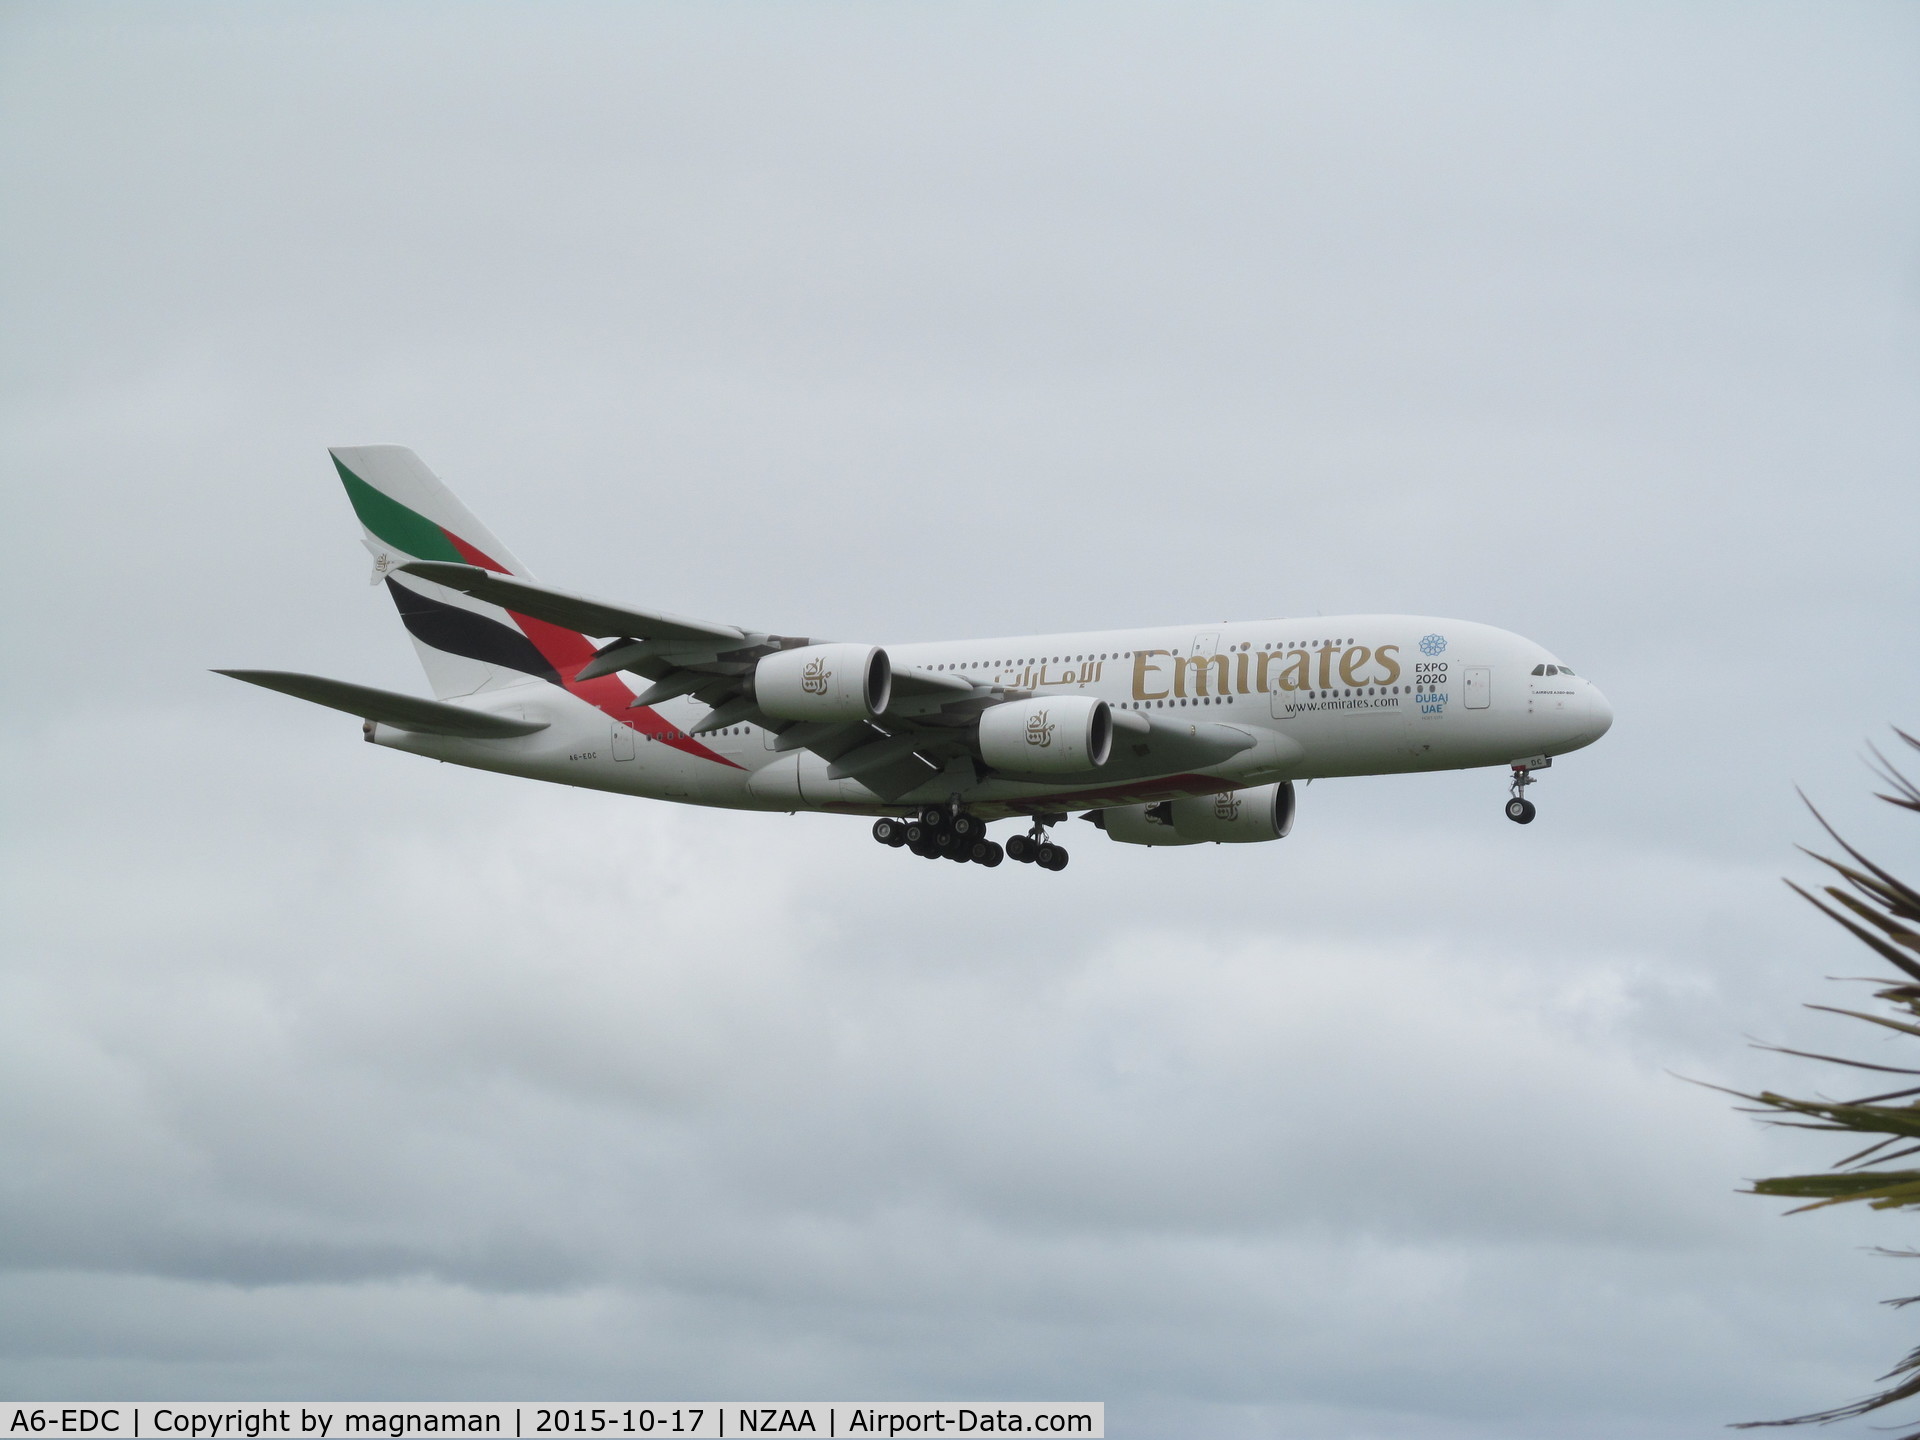 A6-EDC, 2008 Airbus A380-861 C/N 016, on finals to AKL and palm trees